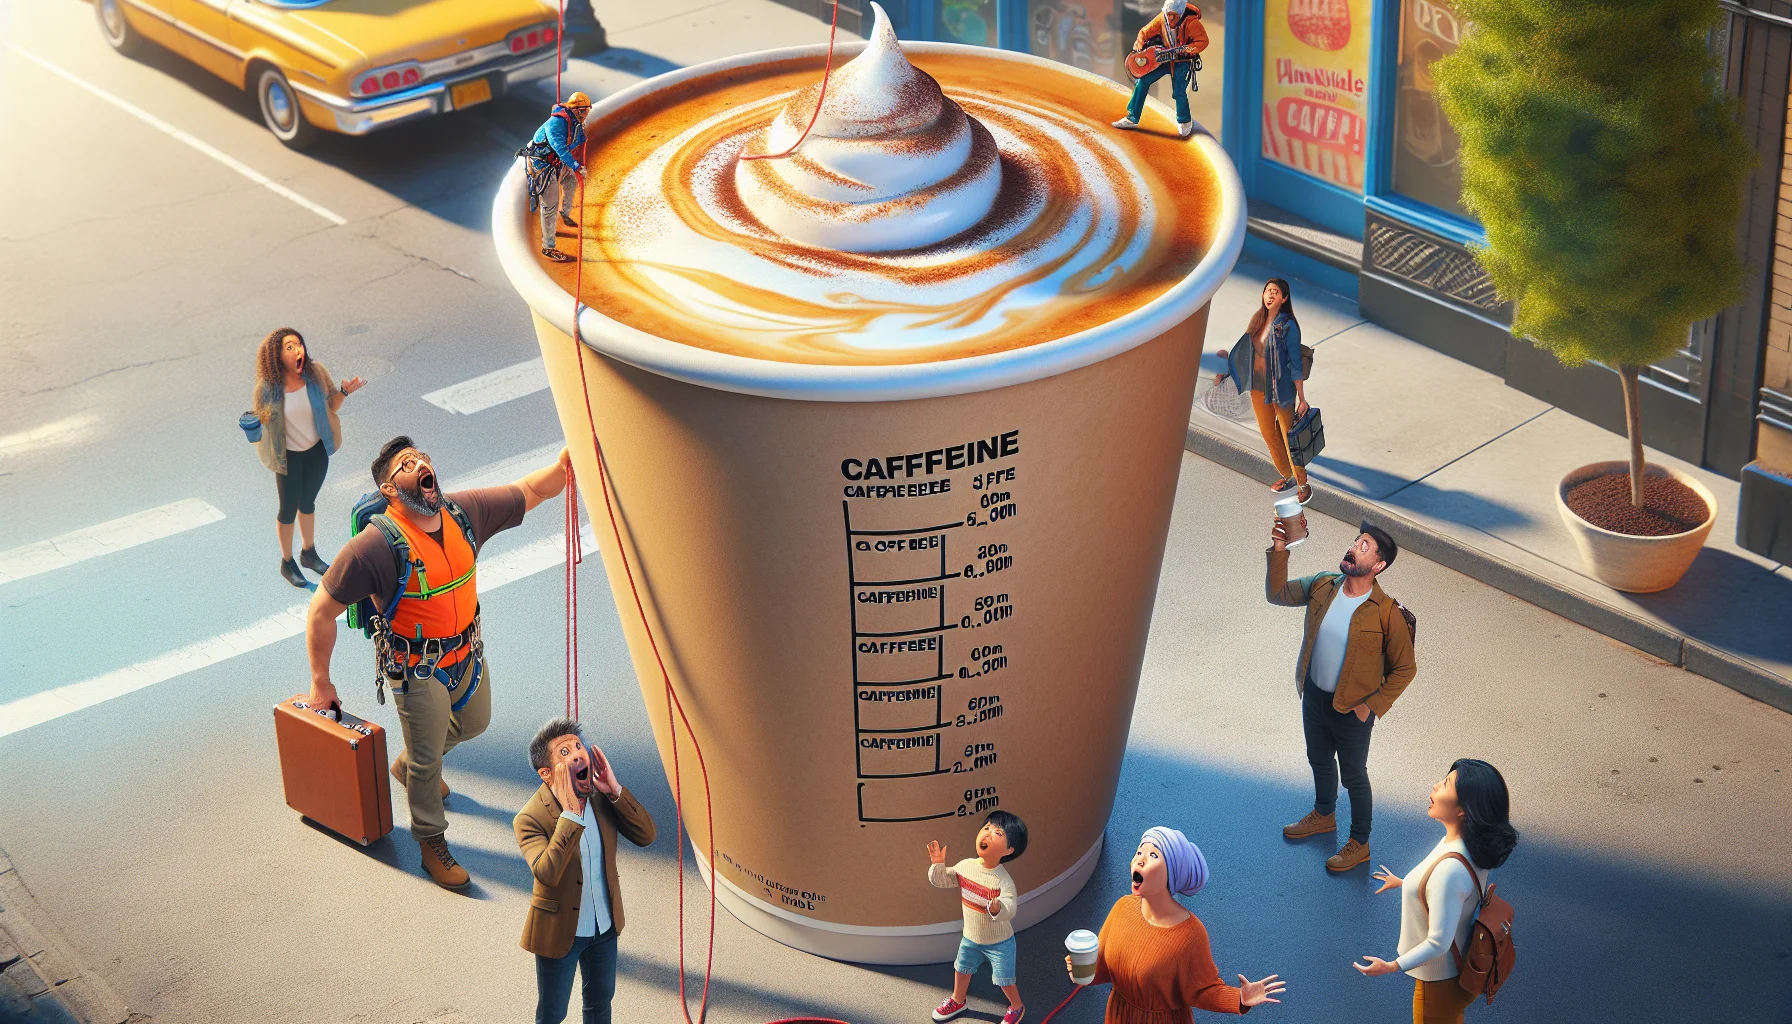 Create a humorous, realistic image about caffeine in a latte. Picture a giant-sized latte on a city street with small, human sized people astounded by its size. The latte overflows with frothy milk, and the towering tower of caffeine is humorously labeled with measurements indicating an exaggeratedly high caffeine content. In the scene, depict individuals of diverse descent: a Middle-Eastern woman and Hispanic man showing surprise while an Asian man is excitedly getting ready to climb up the giant coffee cup with a climber's harness. Everyone is geared up to tackle the day with this monster latte. Let the surroundings be colorful and vibrant, hinting an early morning scene with sunshine hitting the brew.